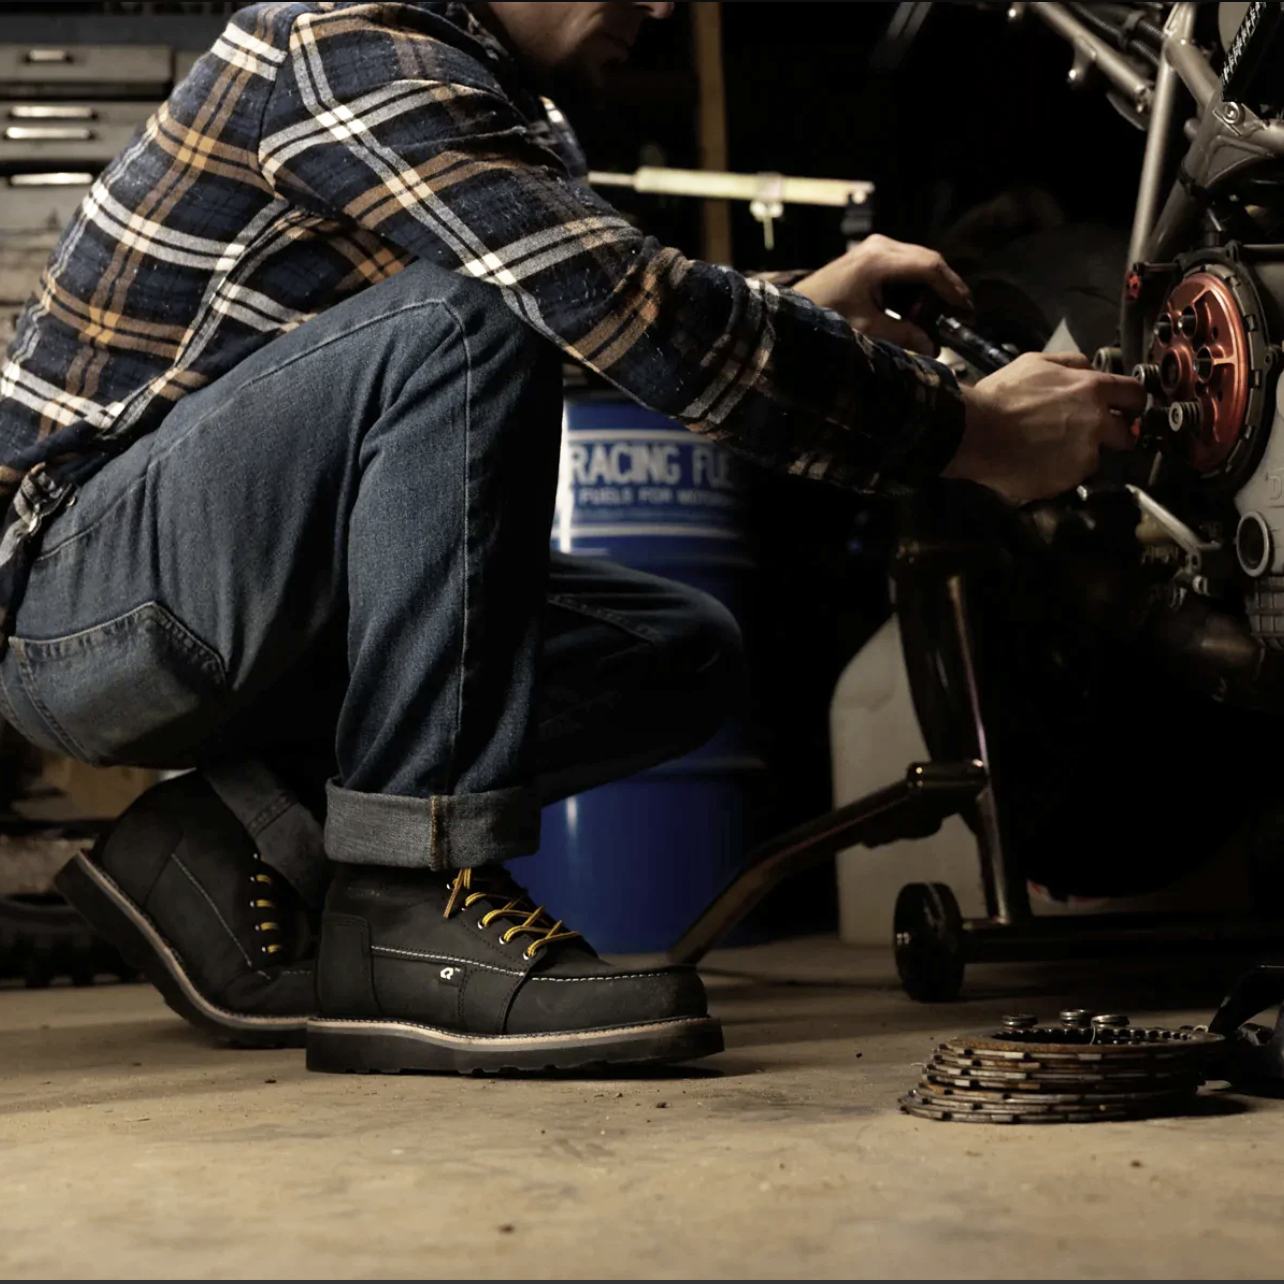 ENGINEERED FOR WORK - - - - -  All-Day Comfort, Durability & Fit  Whether you’re a contractor, carpenter, electrician, landscaper, plumber, or just a local handyman… Craftsmanship is found in every step of our unlined leather work boots. By focusing on fi